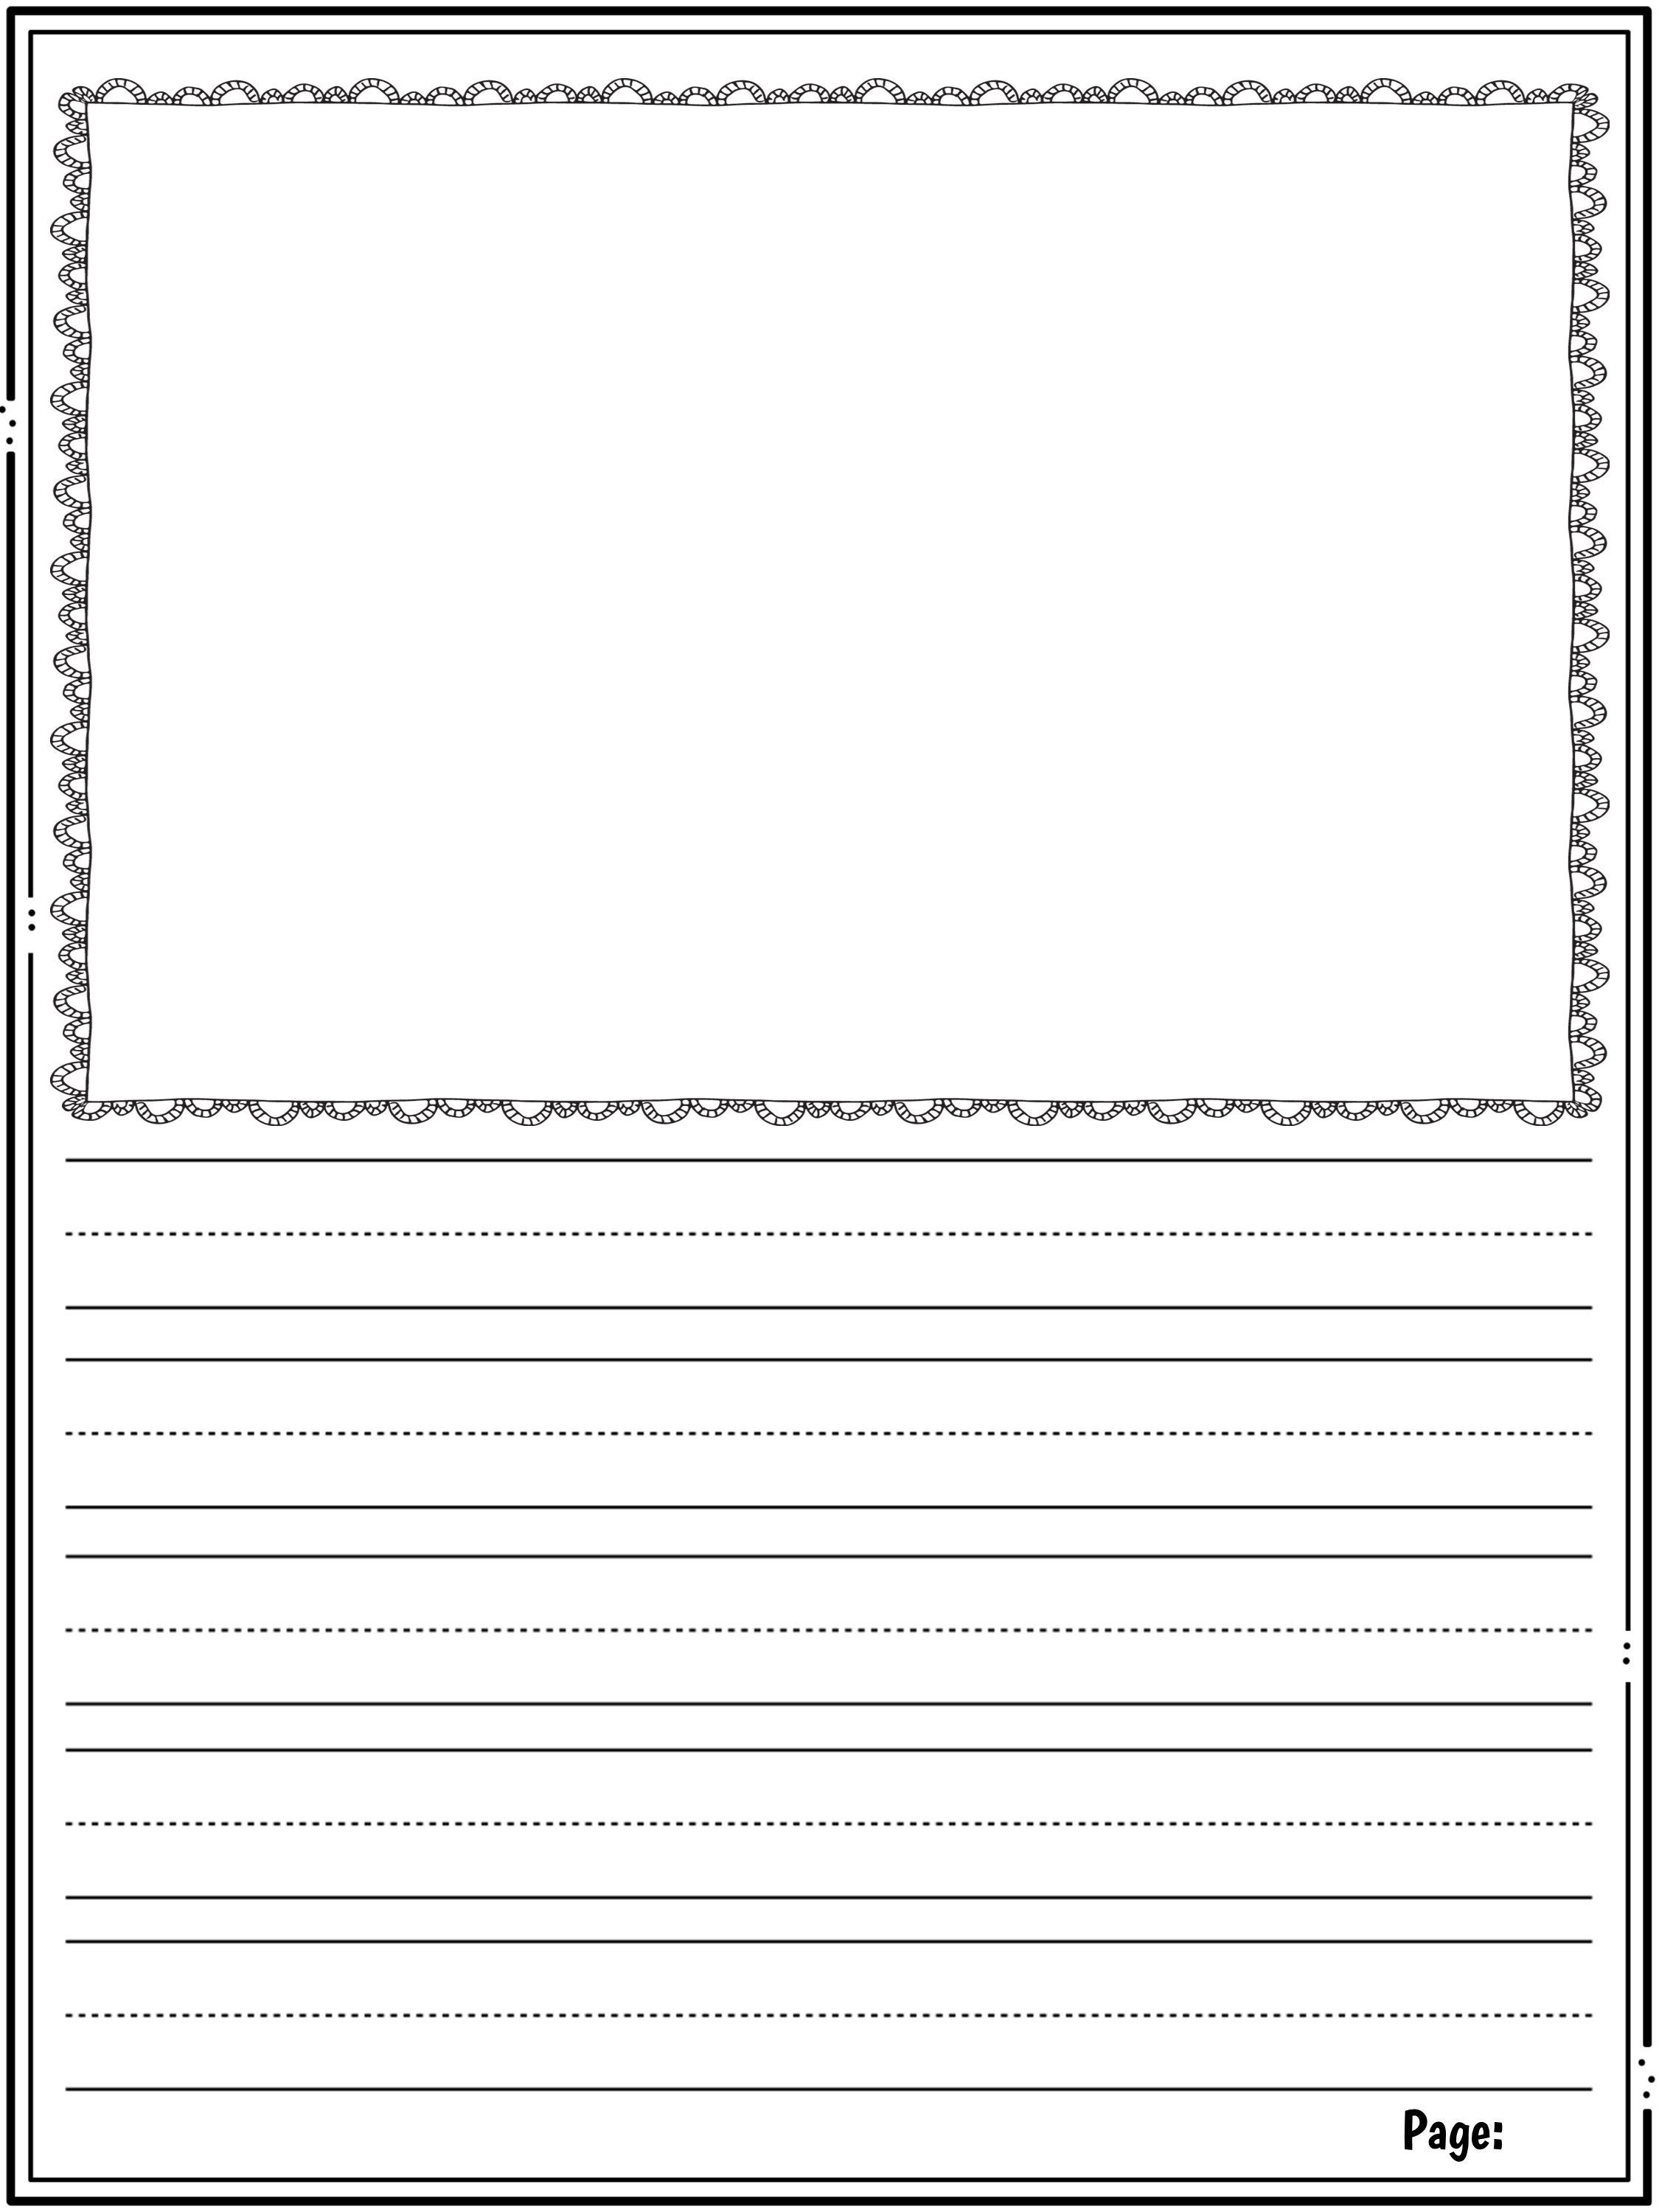 Blank Books & Papers for Writing Workshop - The Curriculum Corner 123